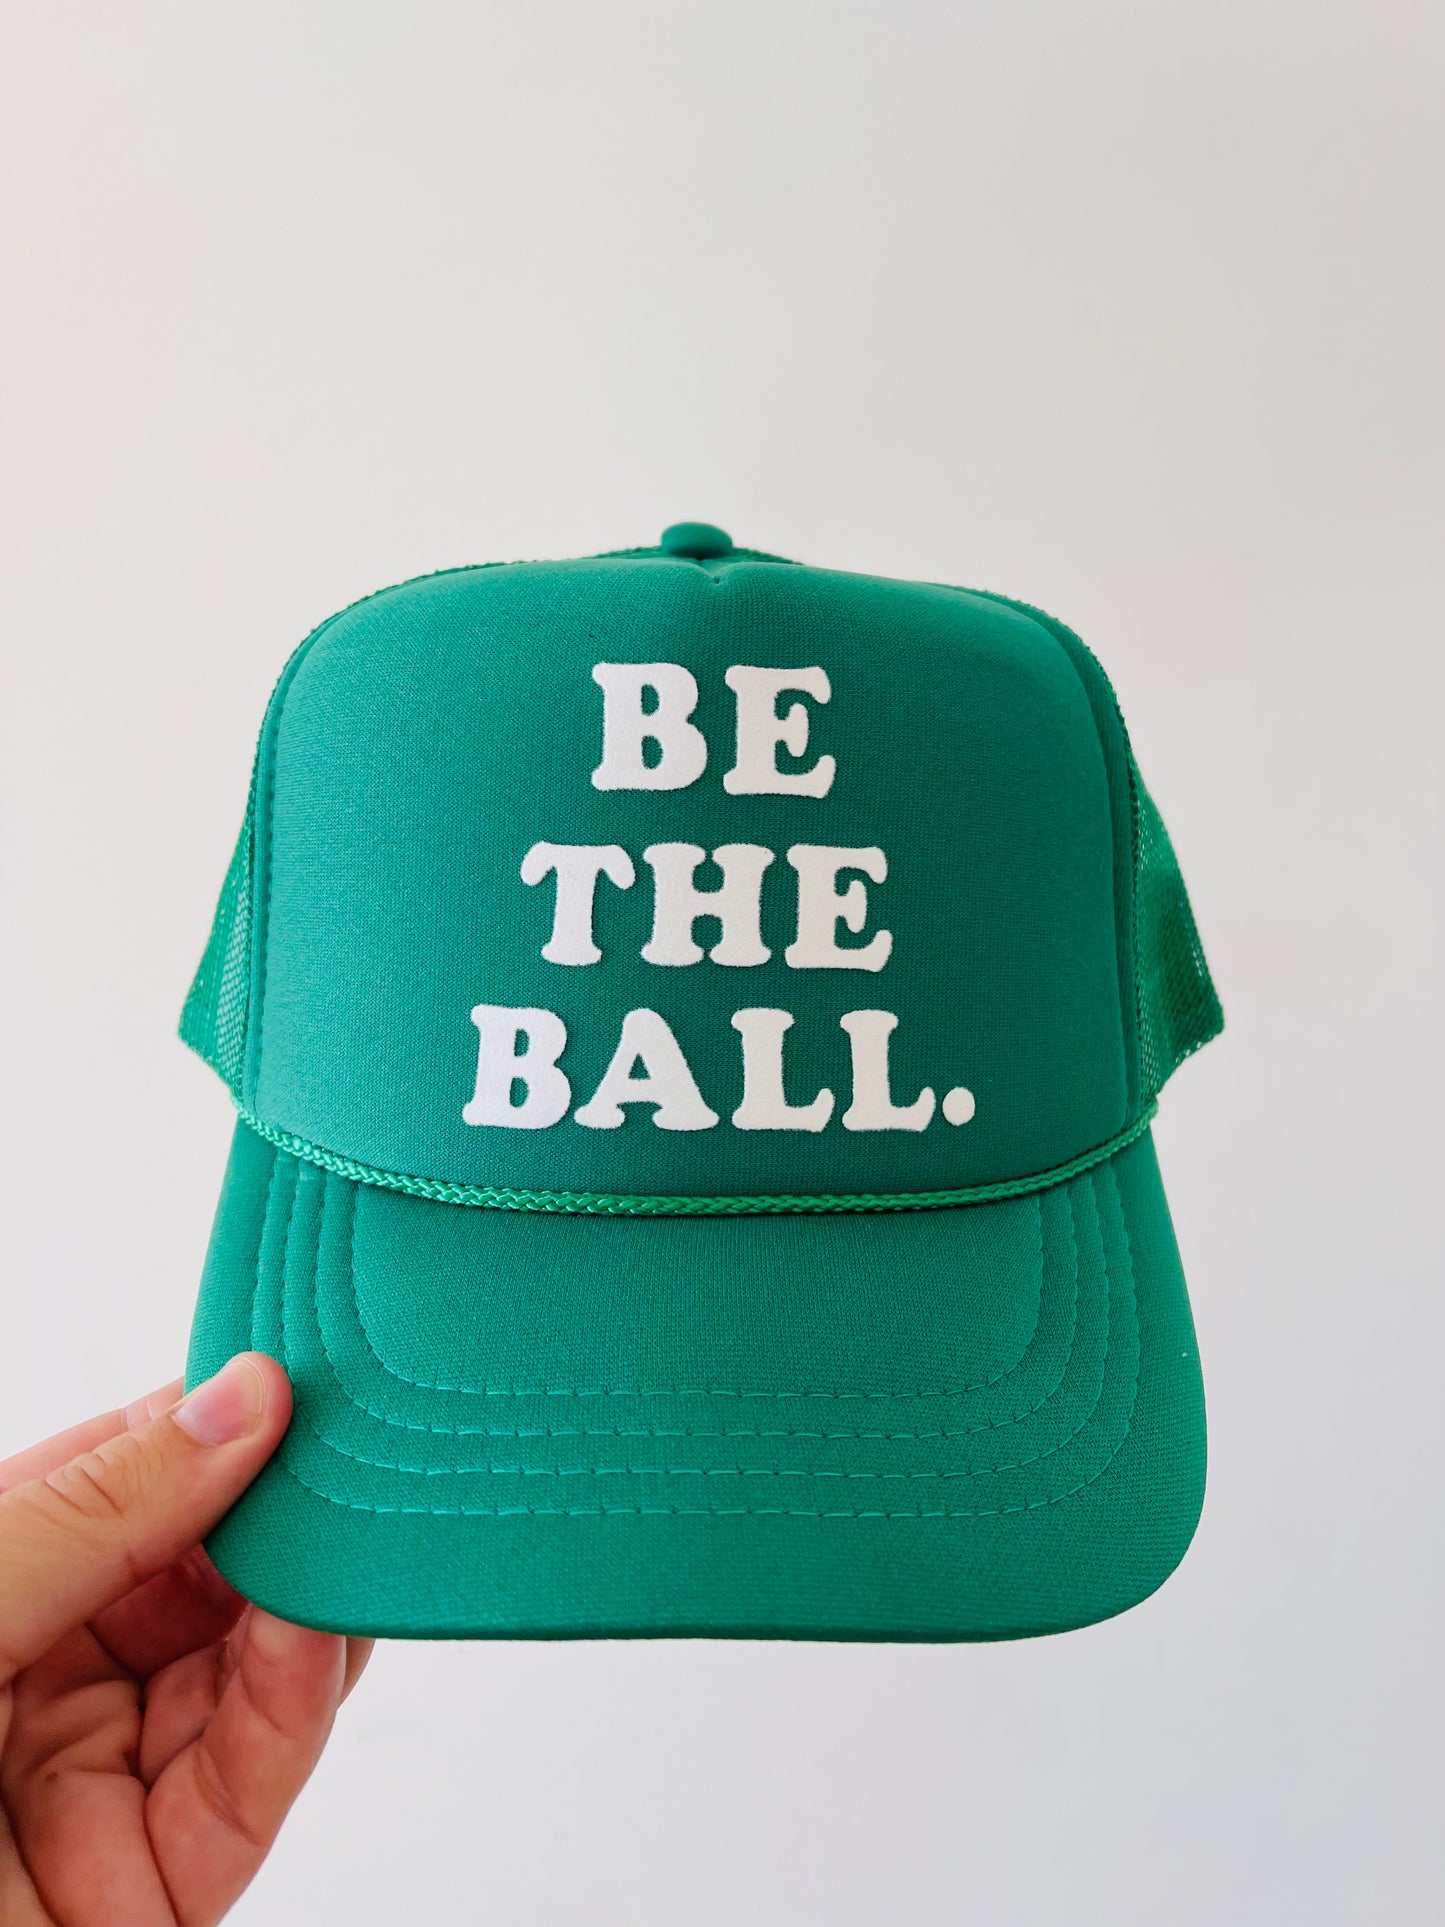 BE THE BALL.